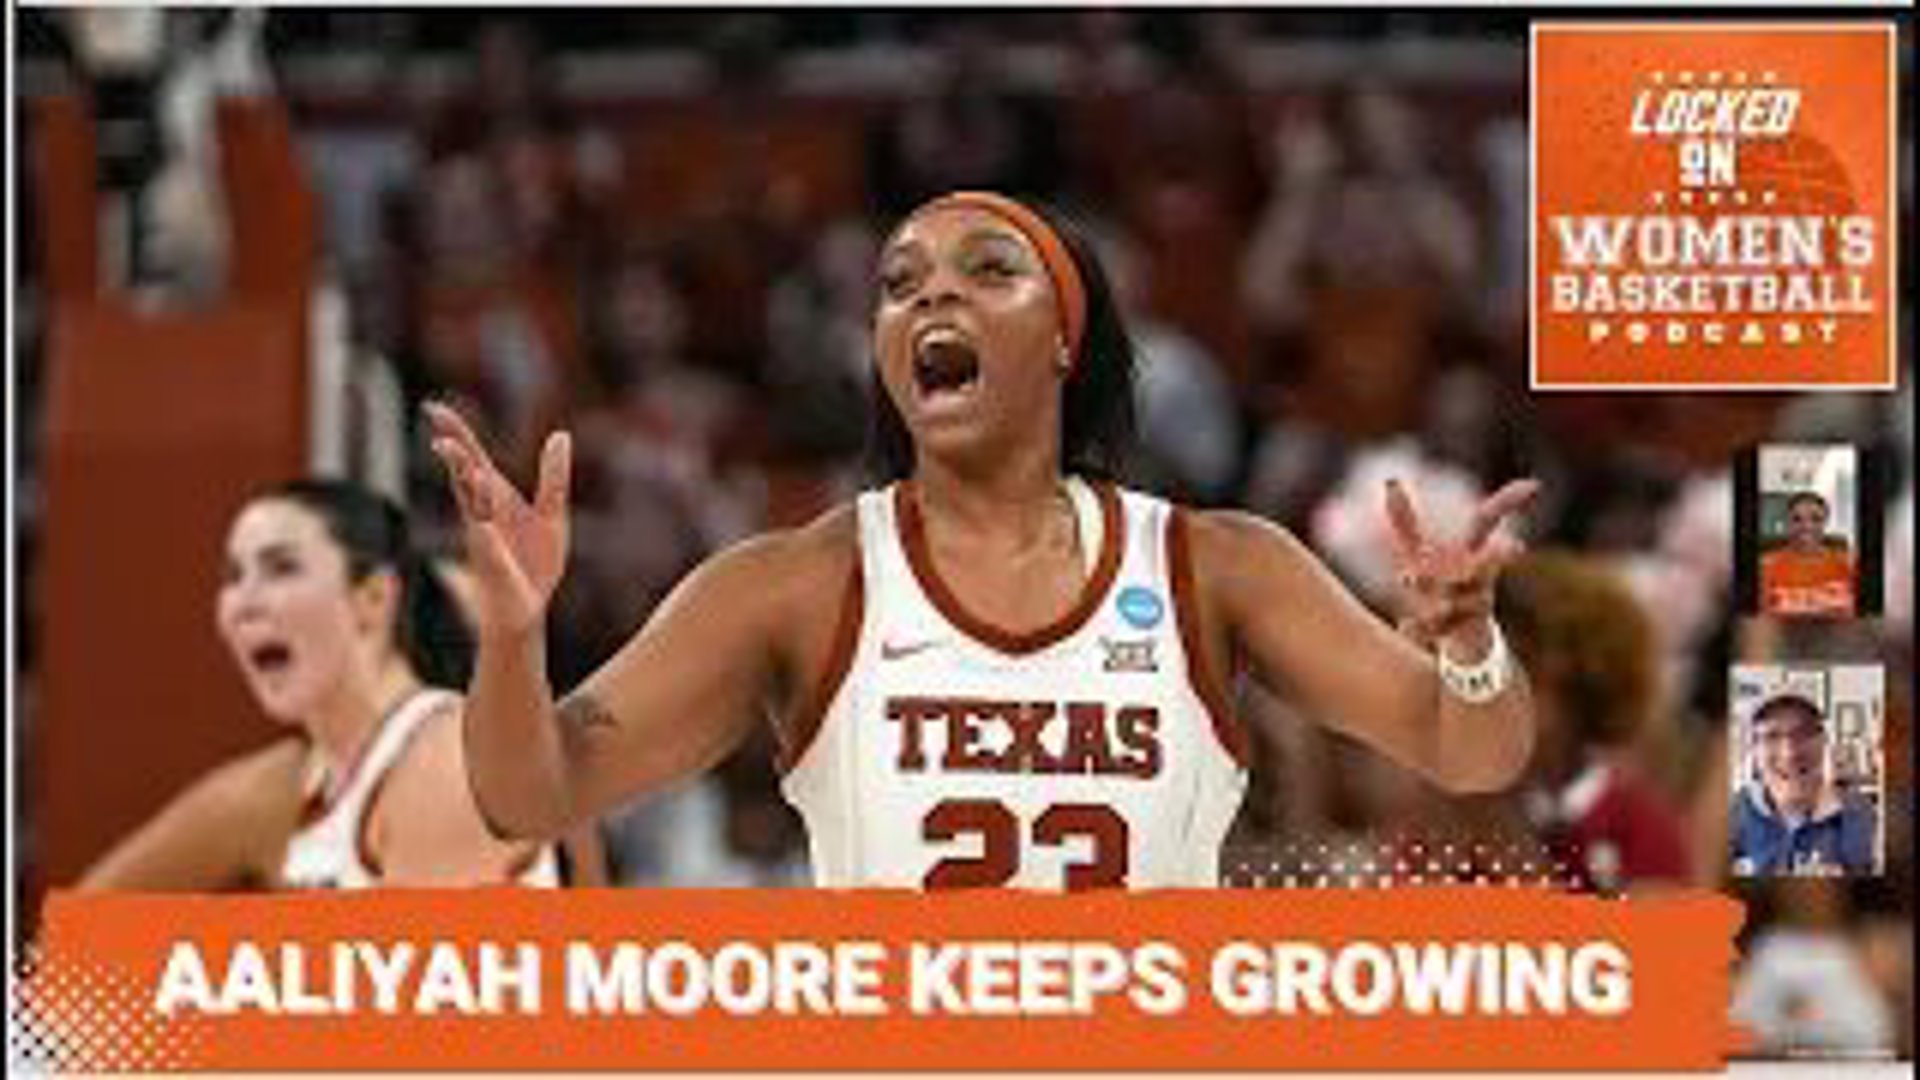 For Aaliyah Moore, every setback is simply something to learn from and come back even better. From injuries to her ankle and knee, to adjusting to the media & more!